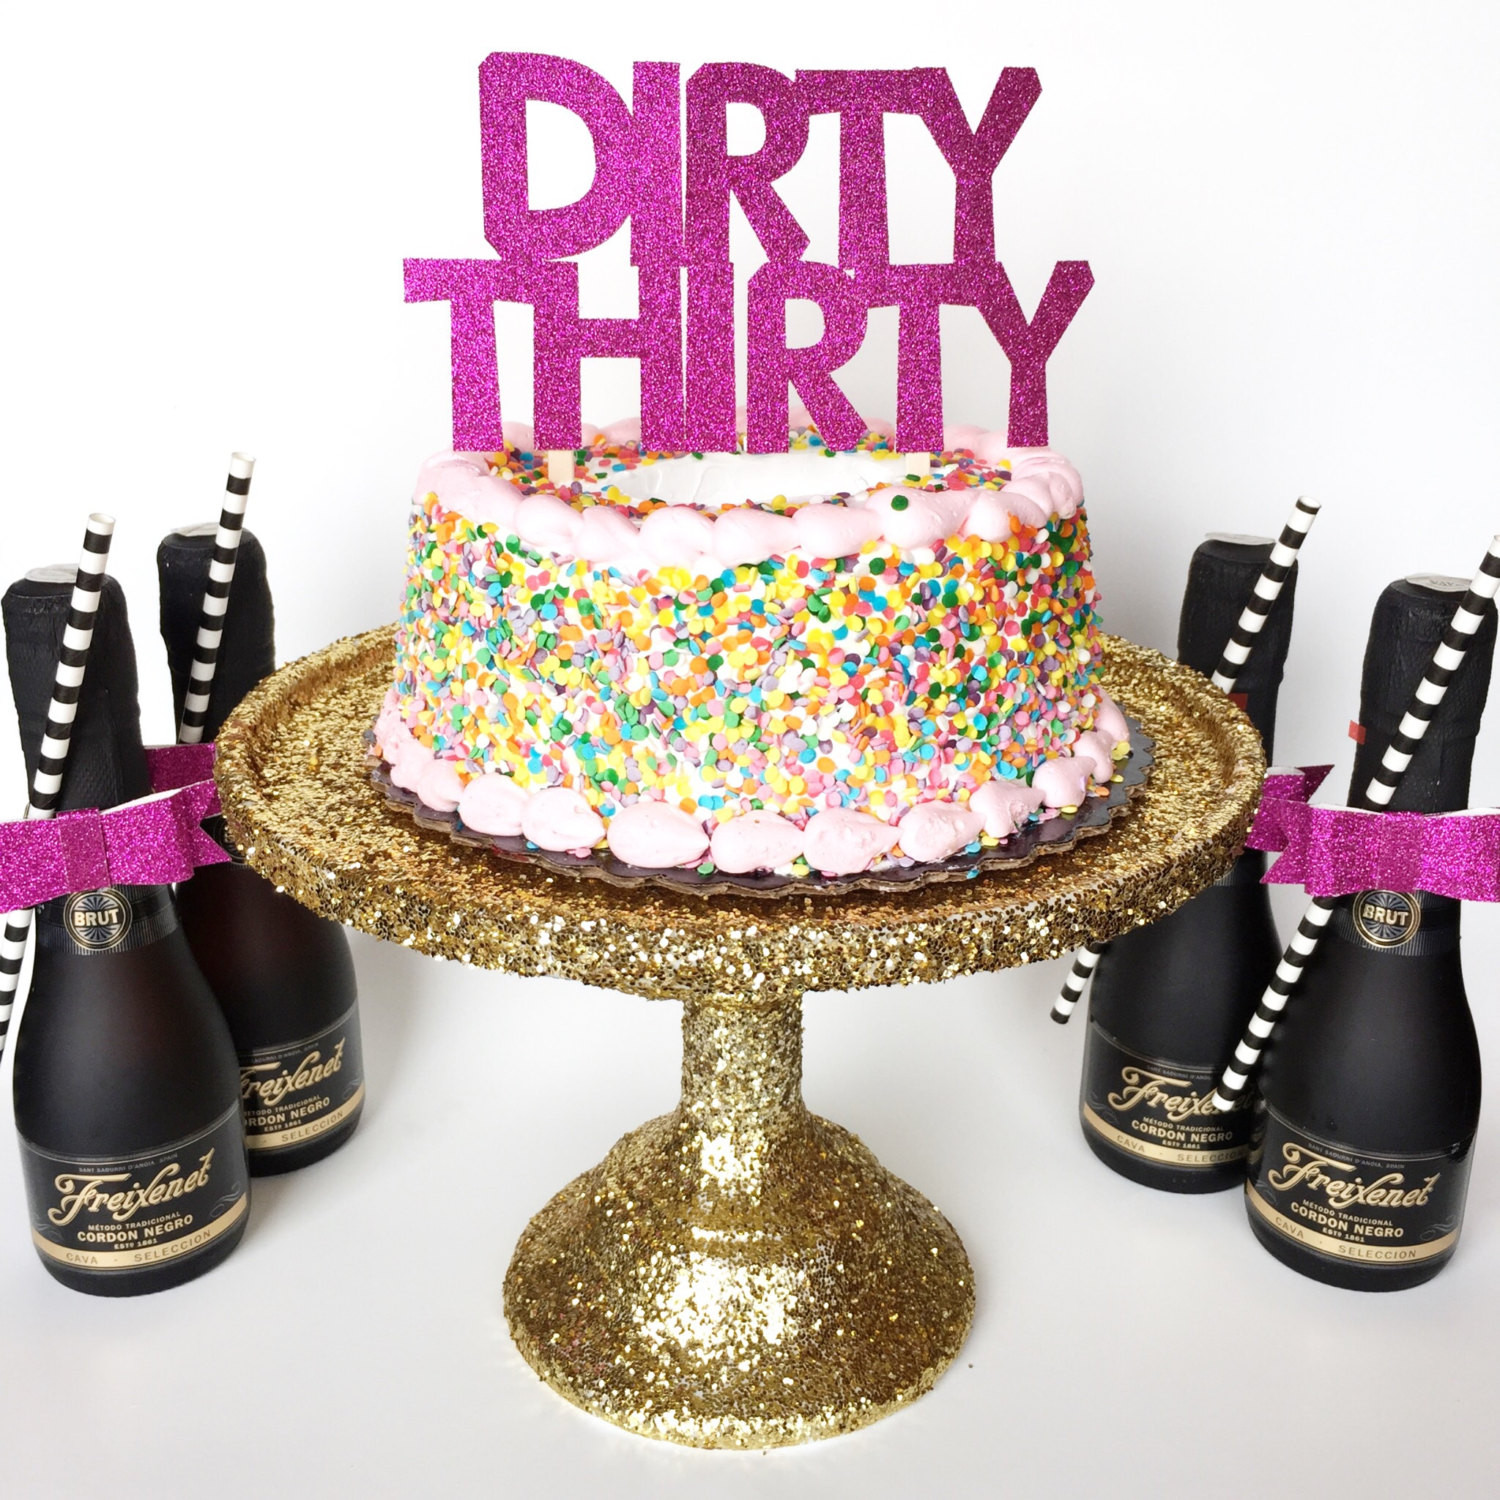 Dirty Thirty Birthday Party Ideas
 Dirty Thirty Cake Topper Birthday Party Party by